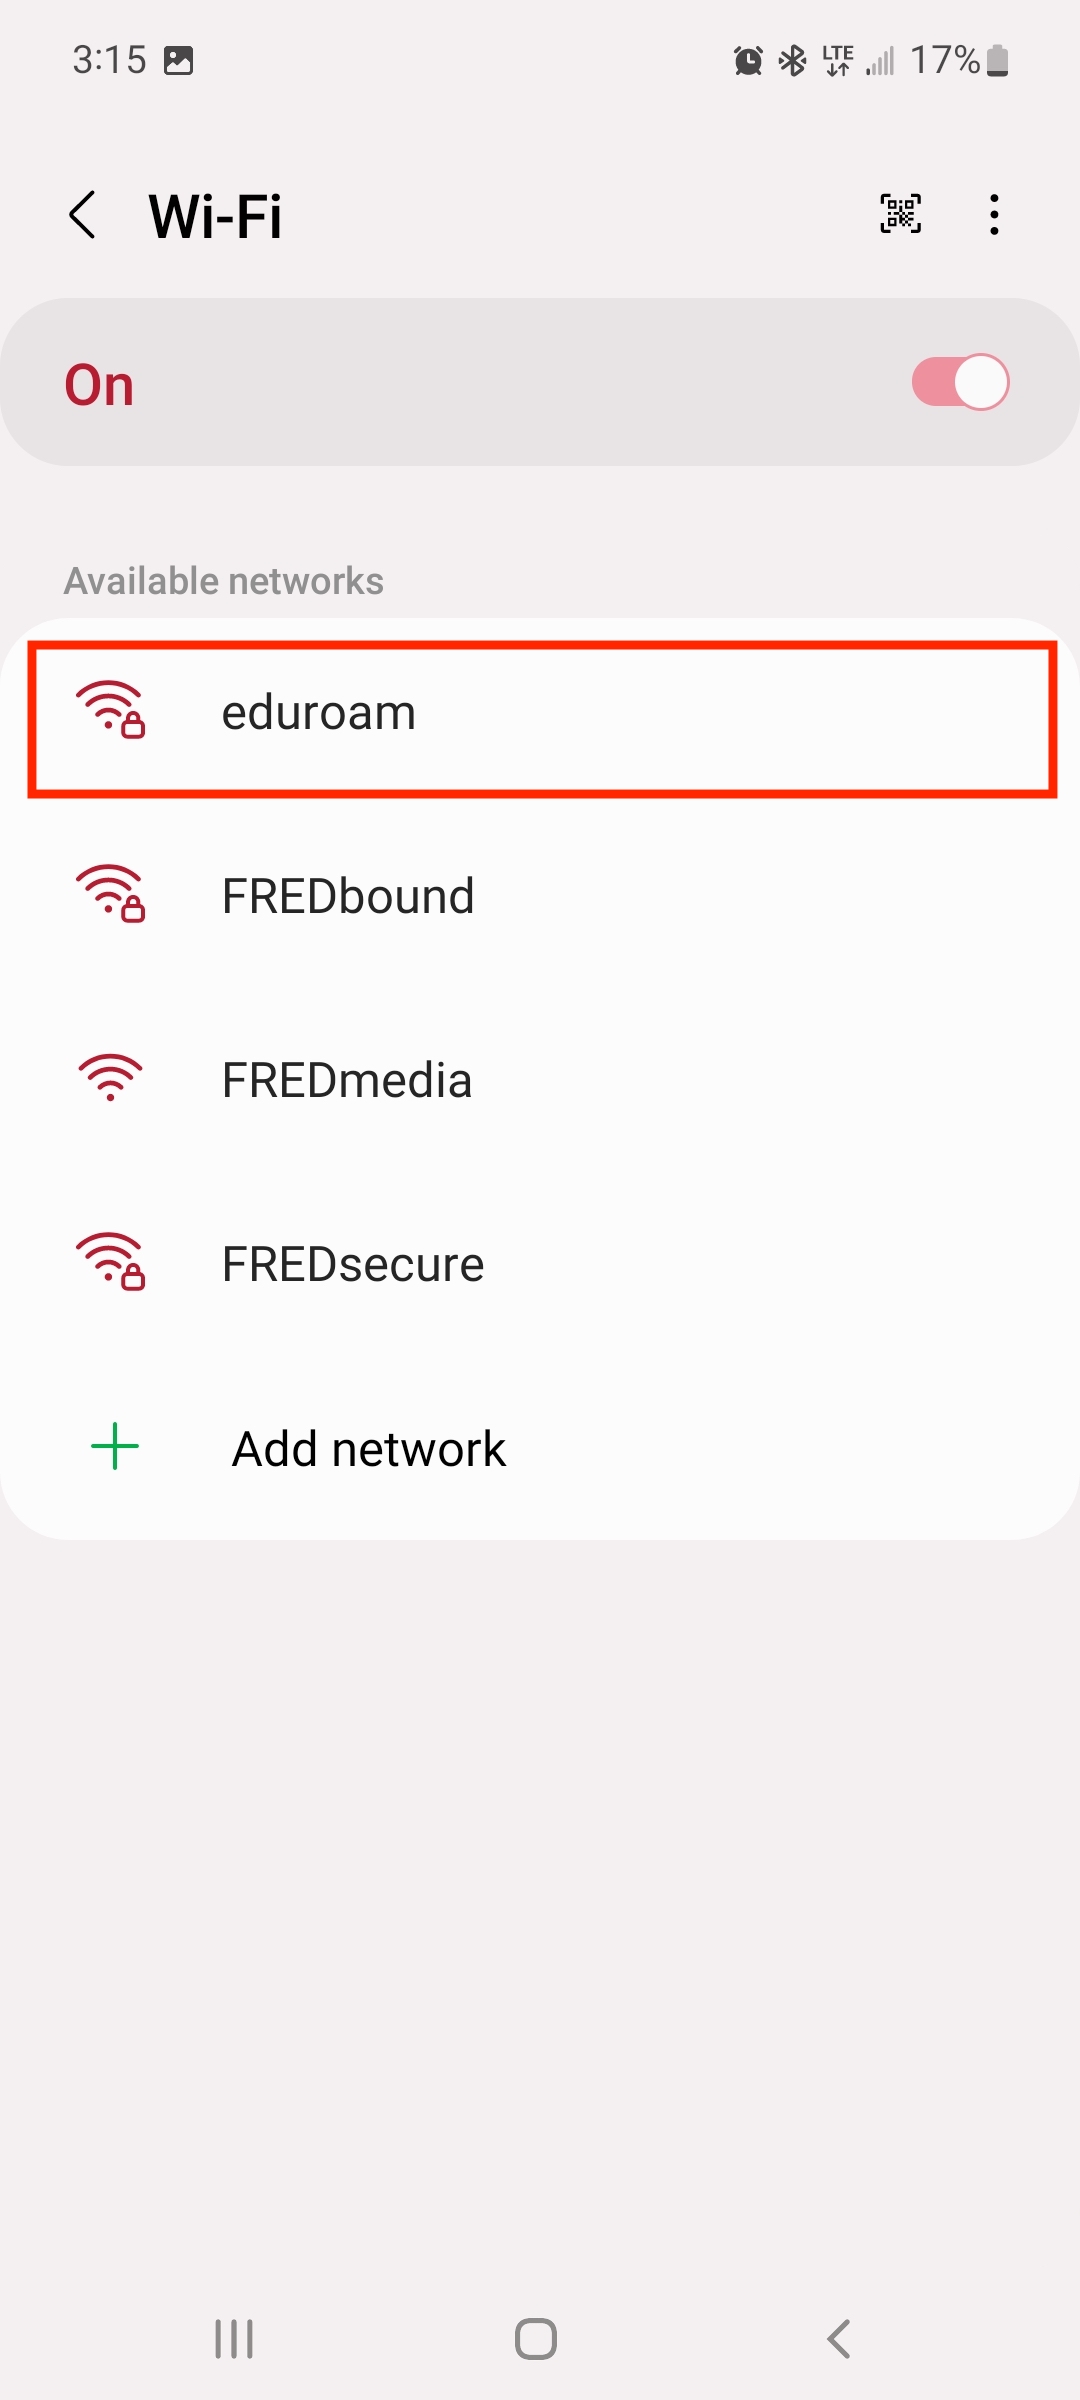 The Wi-Fi menu on an Android device